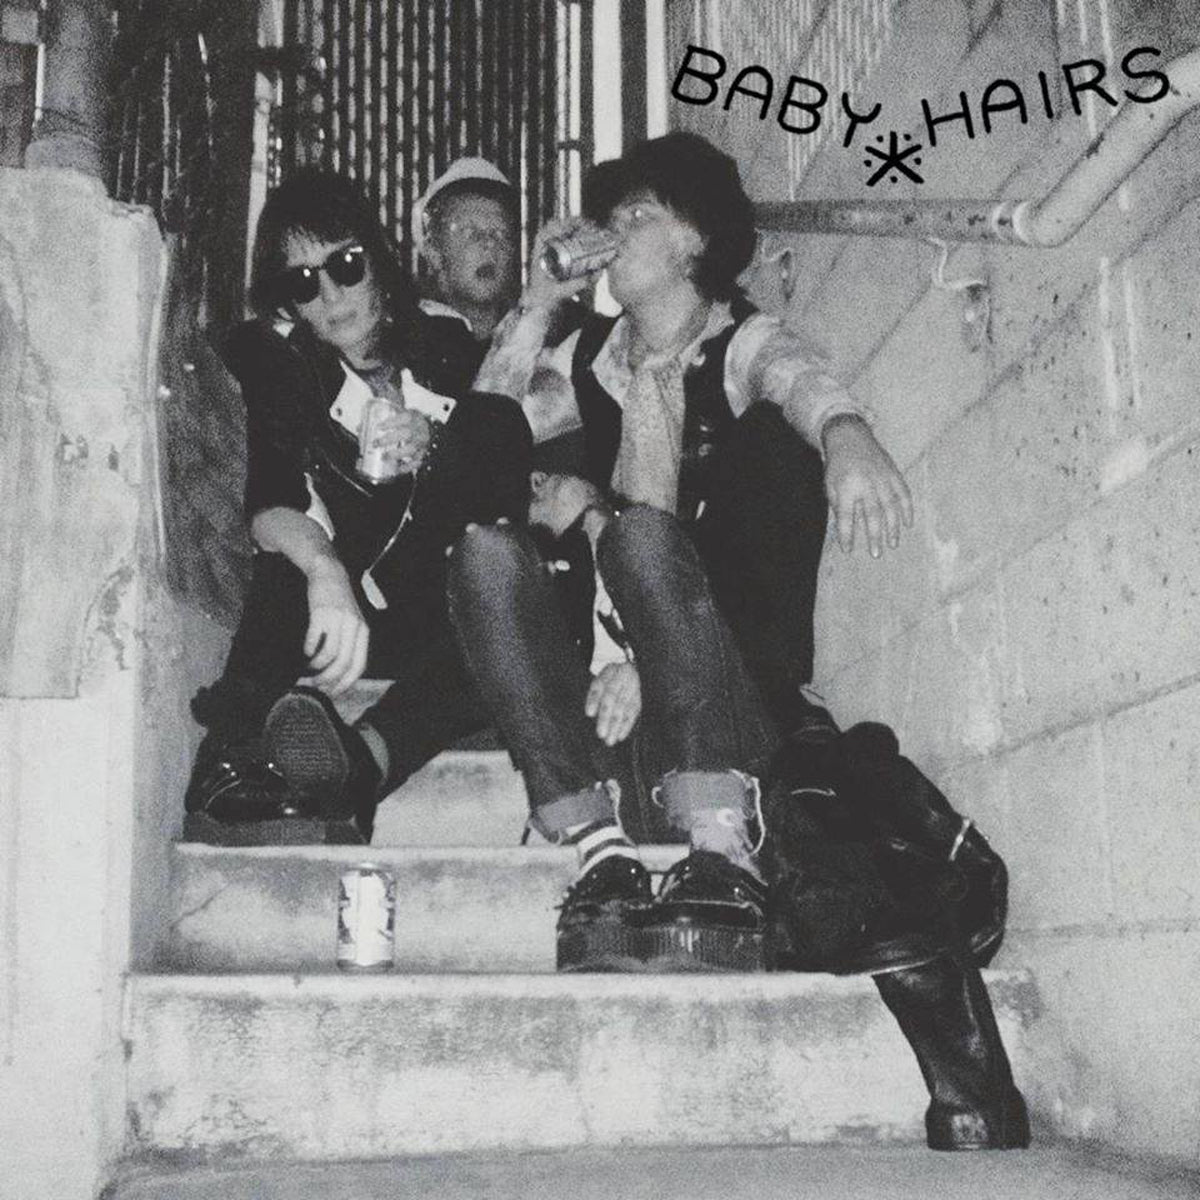 Baby Hairs- S/T 7” ~RARE GOLD METALLIC COVER LTD TO 50!